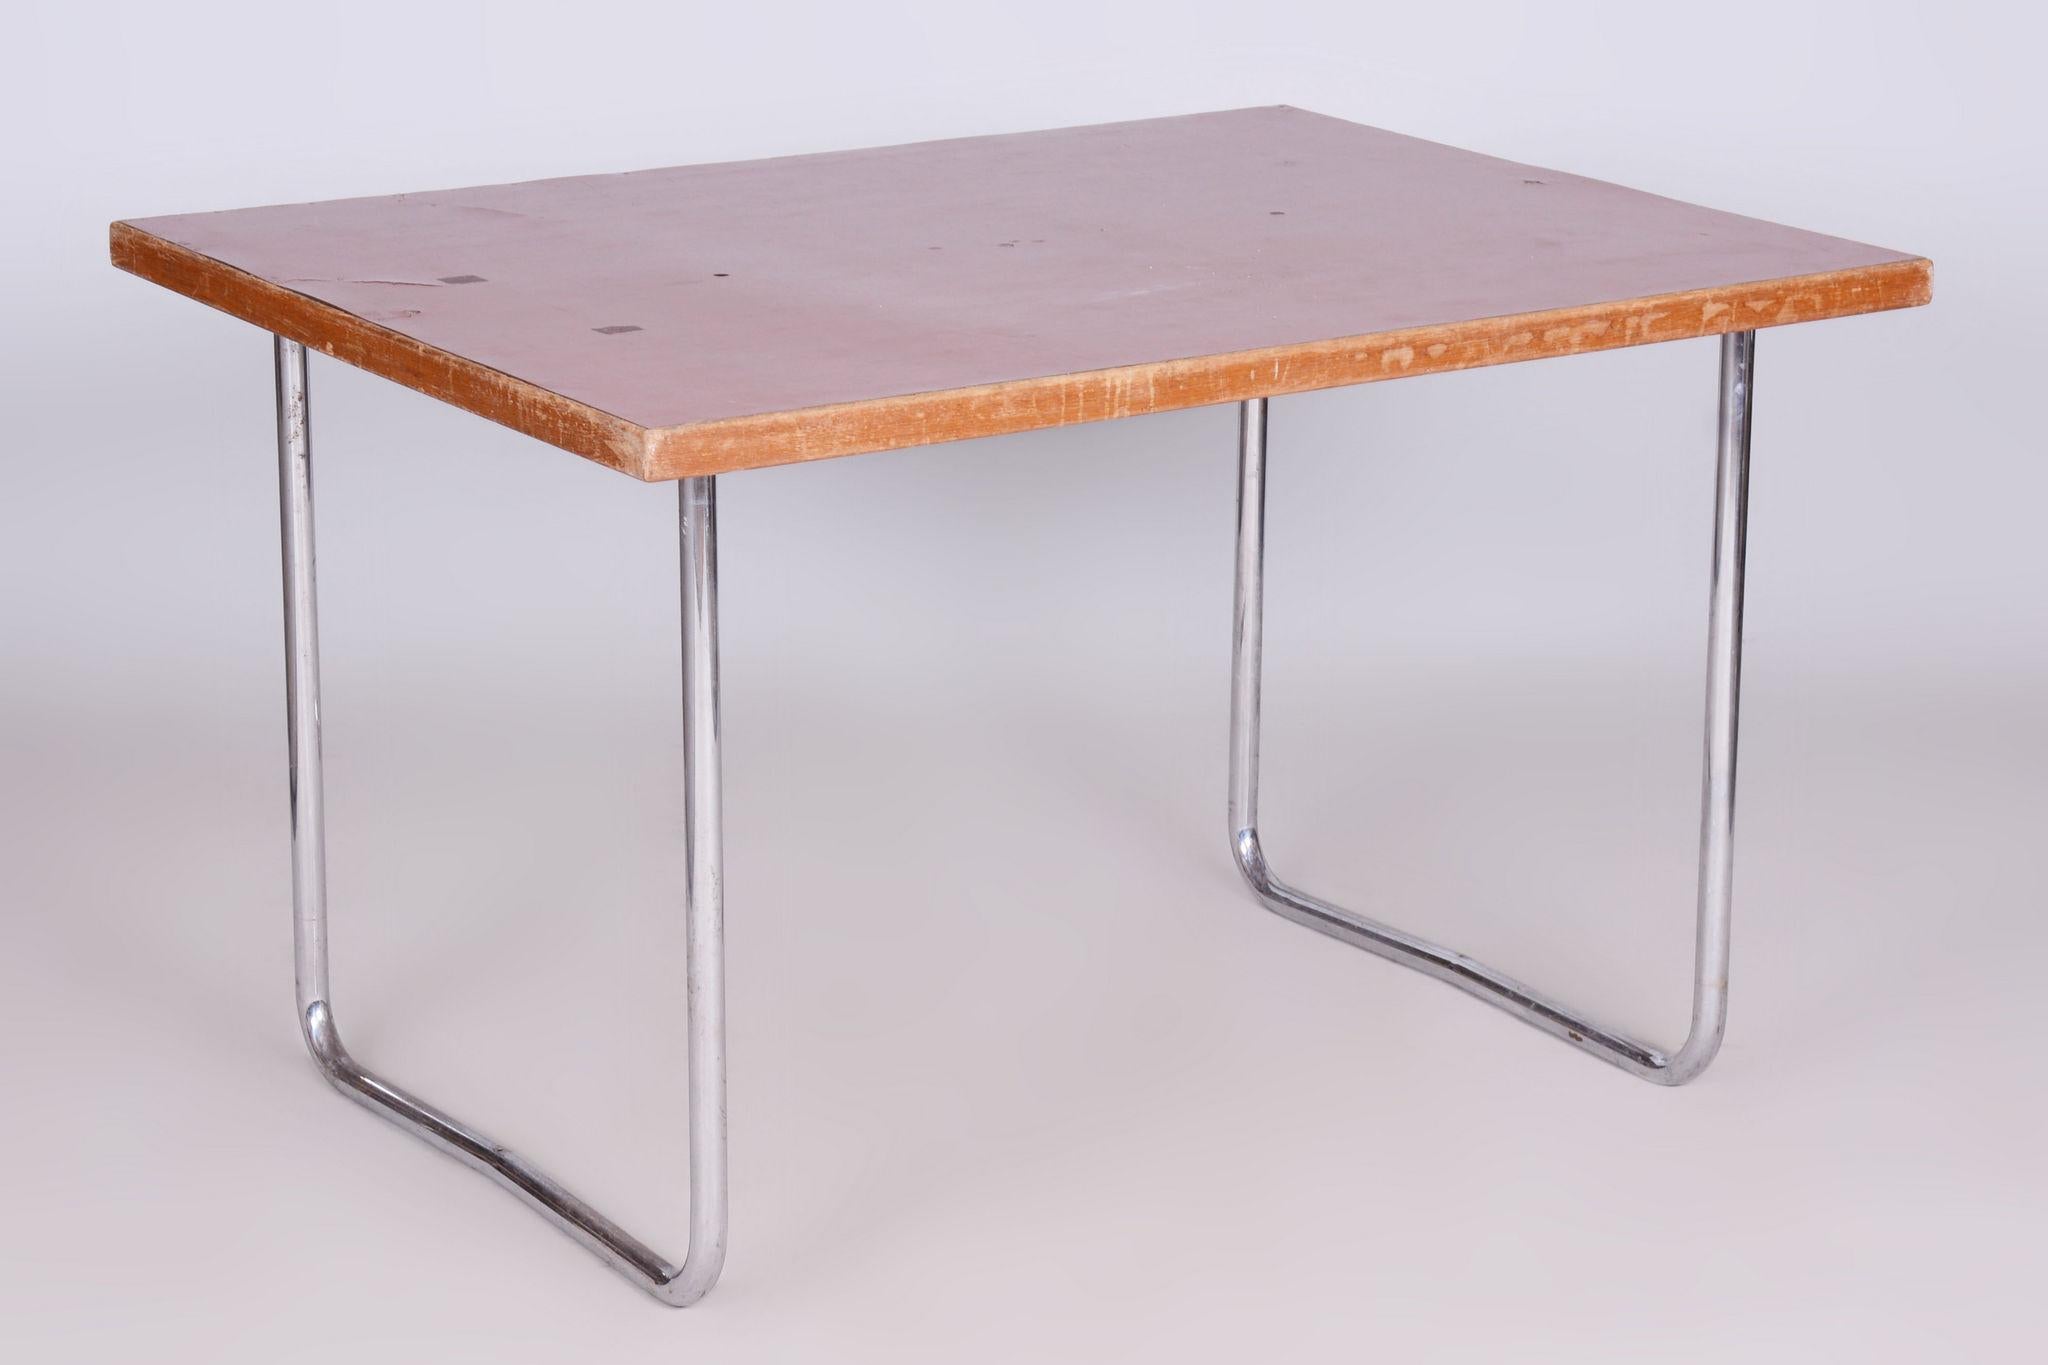 Mid-20th Century Original Bauhaus Dining Table, by Mücke - Melder, Well Preserved, Czech, 1930s For Sale